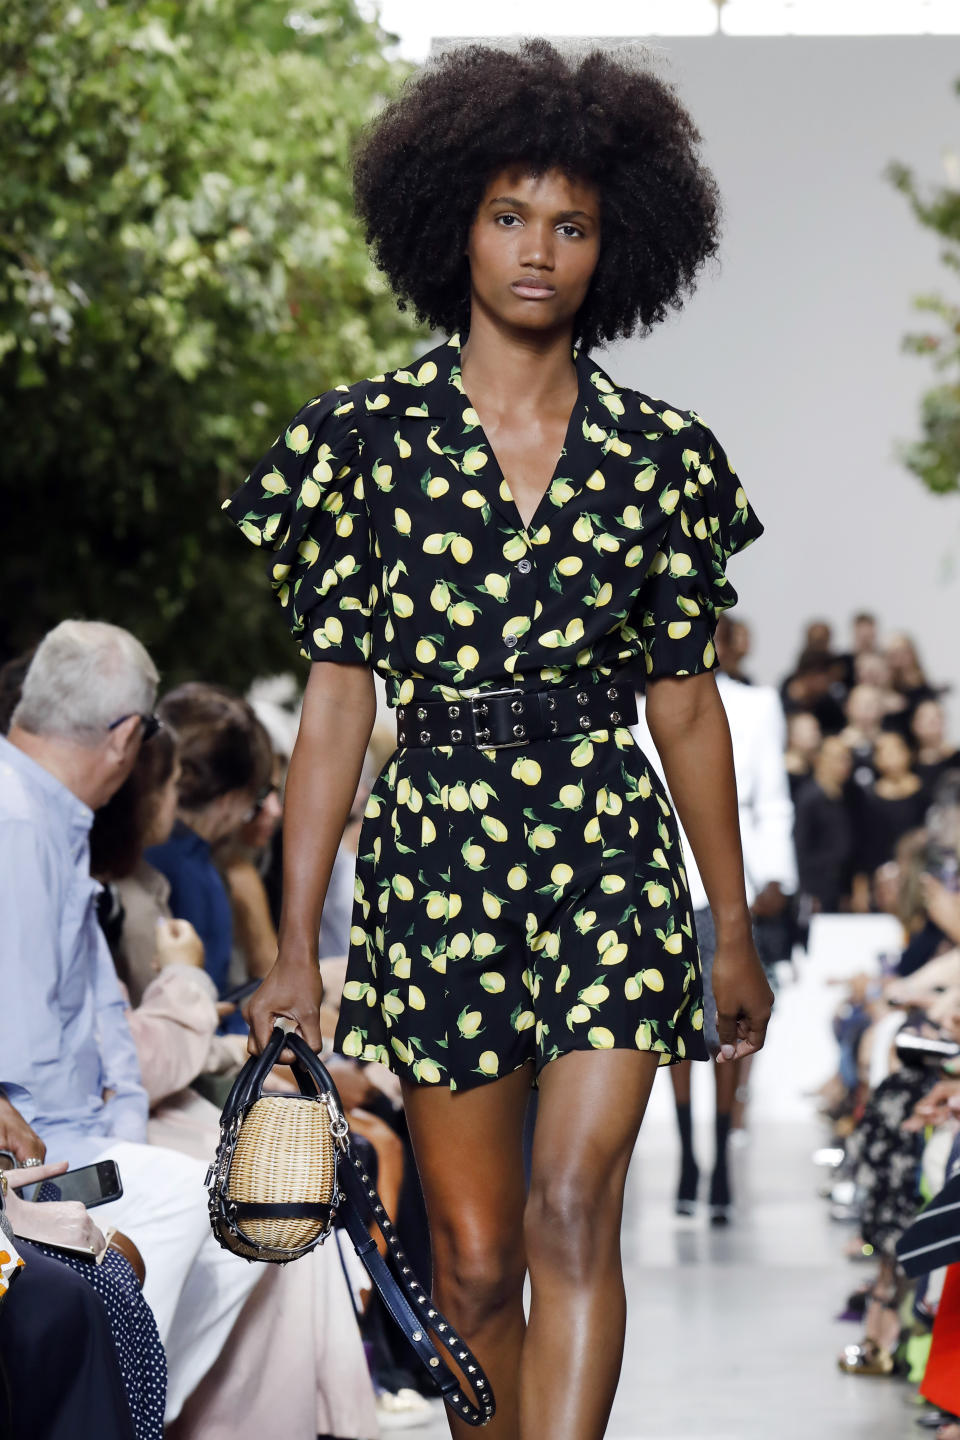 The Michael Kors collection is modeled during Fashion Week in New York, Wednesday, Sept. 11, 2019. (AP Photo/Richard Drew)